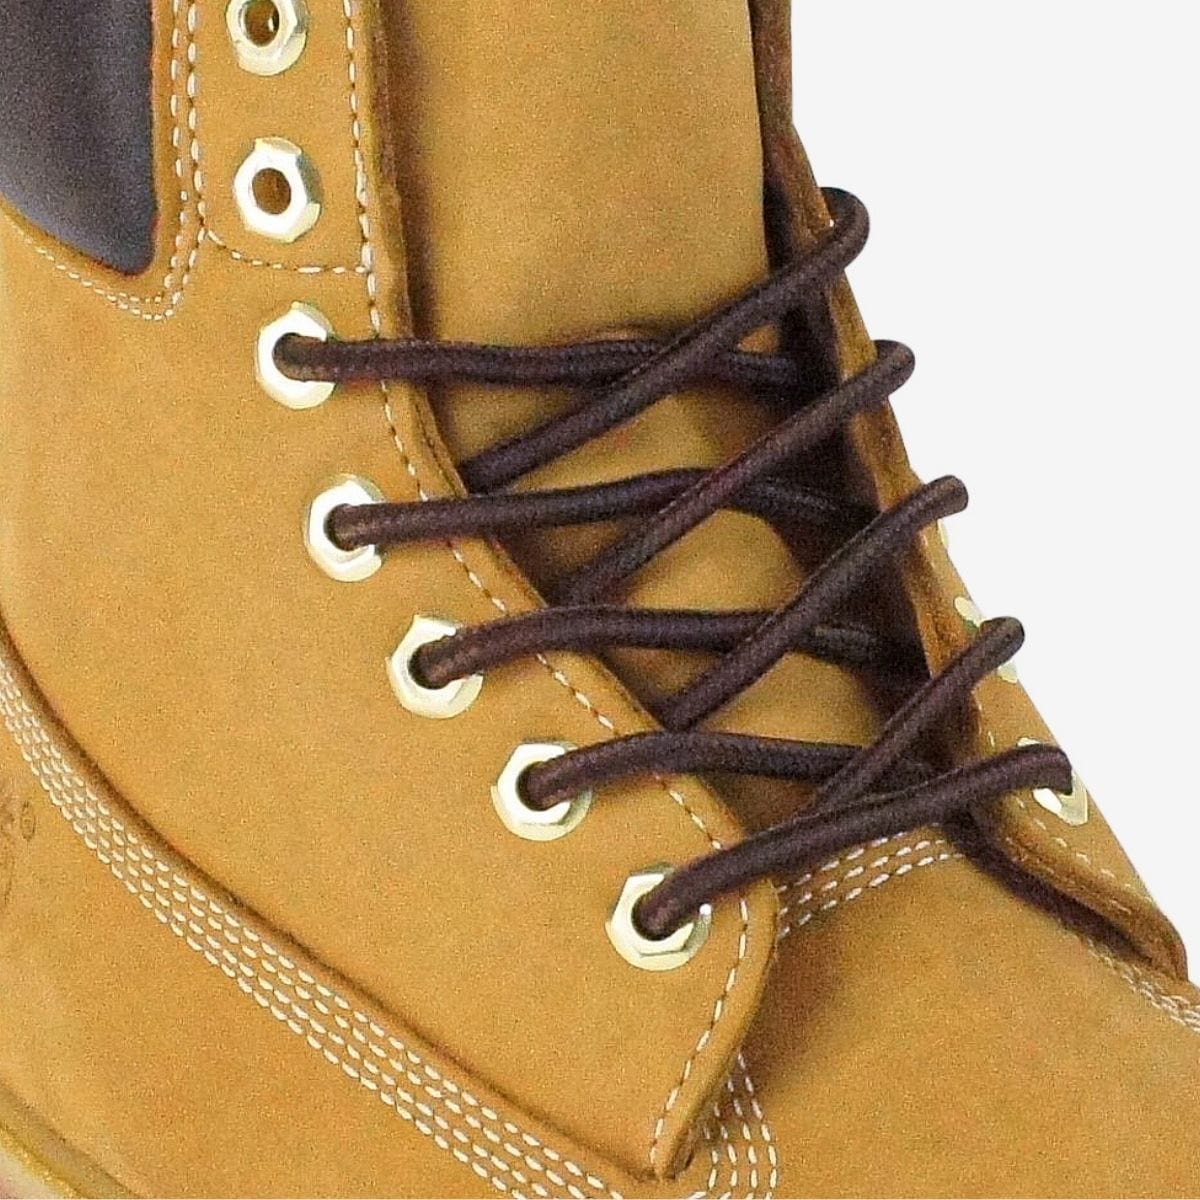 shop-round-shoelaces-online-in-brown-and-dark-brown-for-boots-sneakers-and-running-shoes